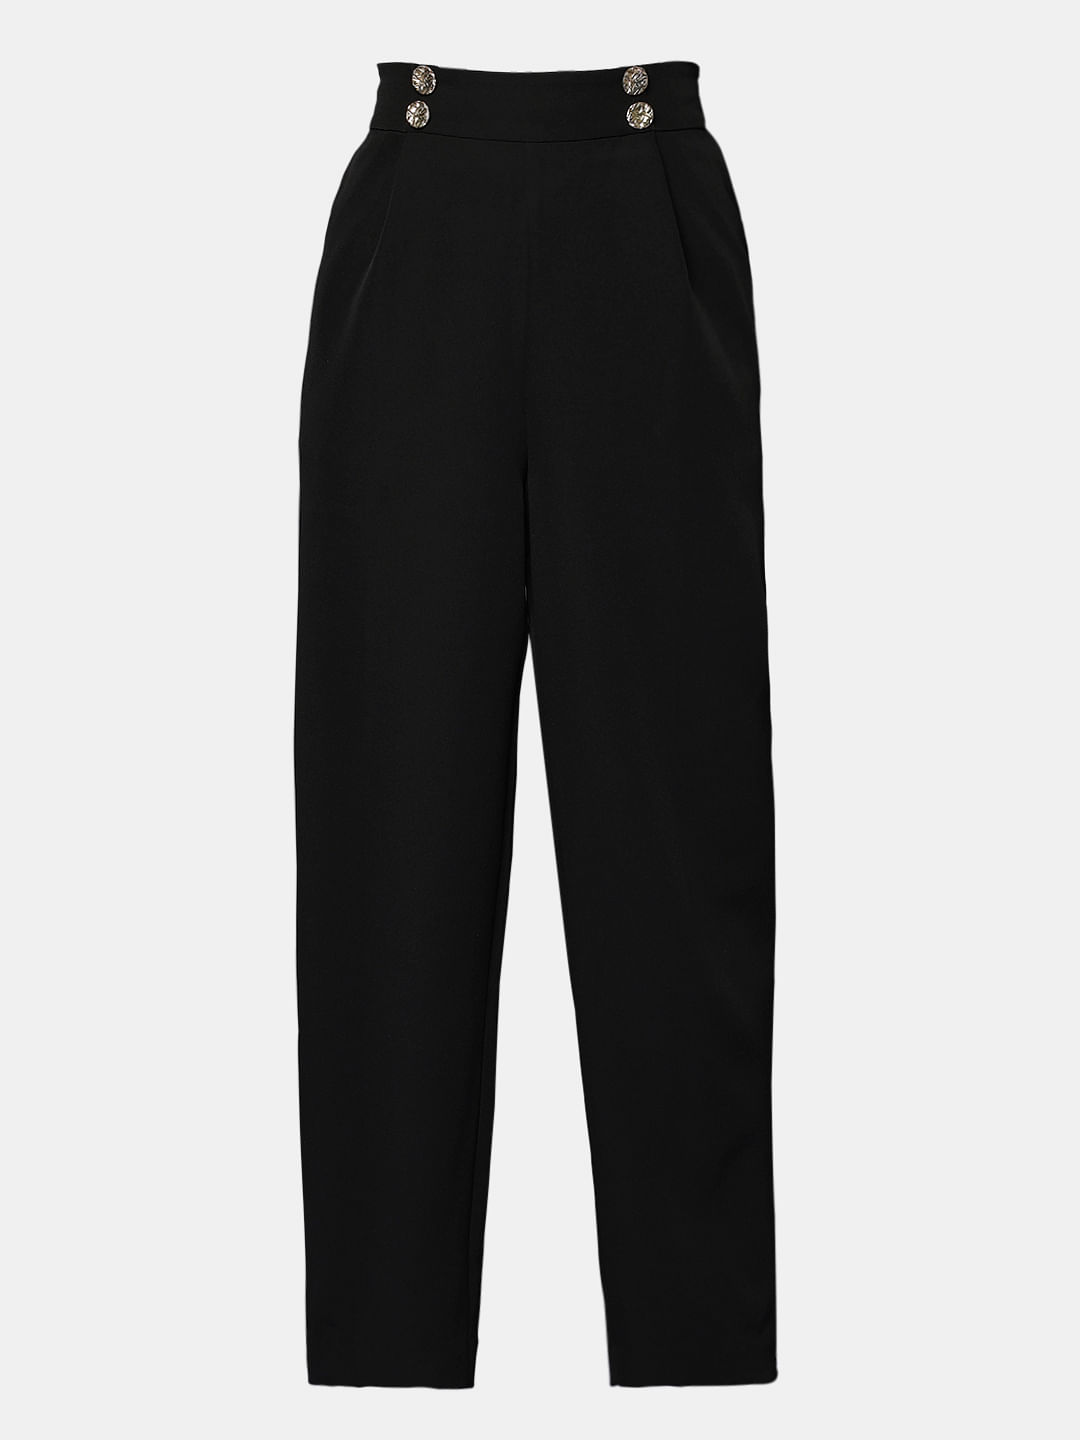 NS Balloon Ankle Length Fit Men's Track Pant